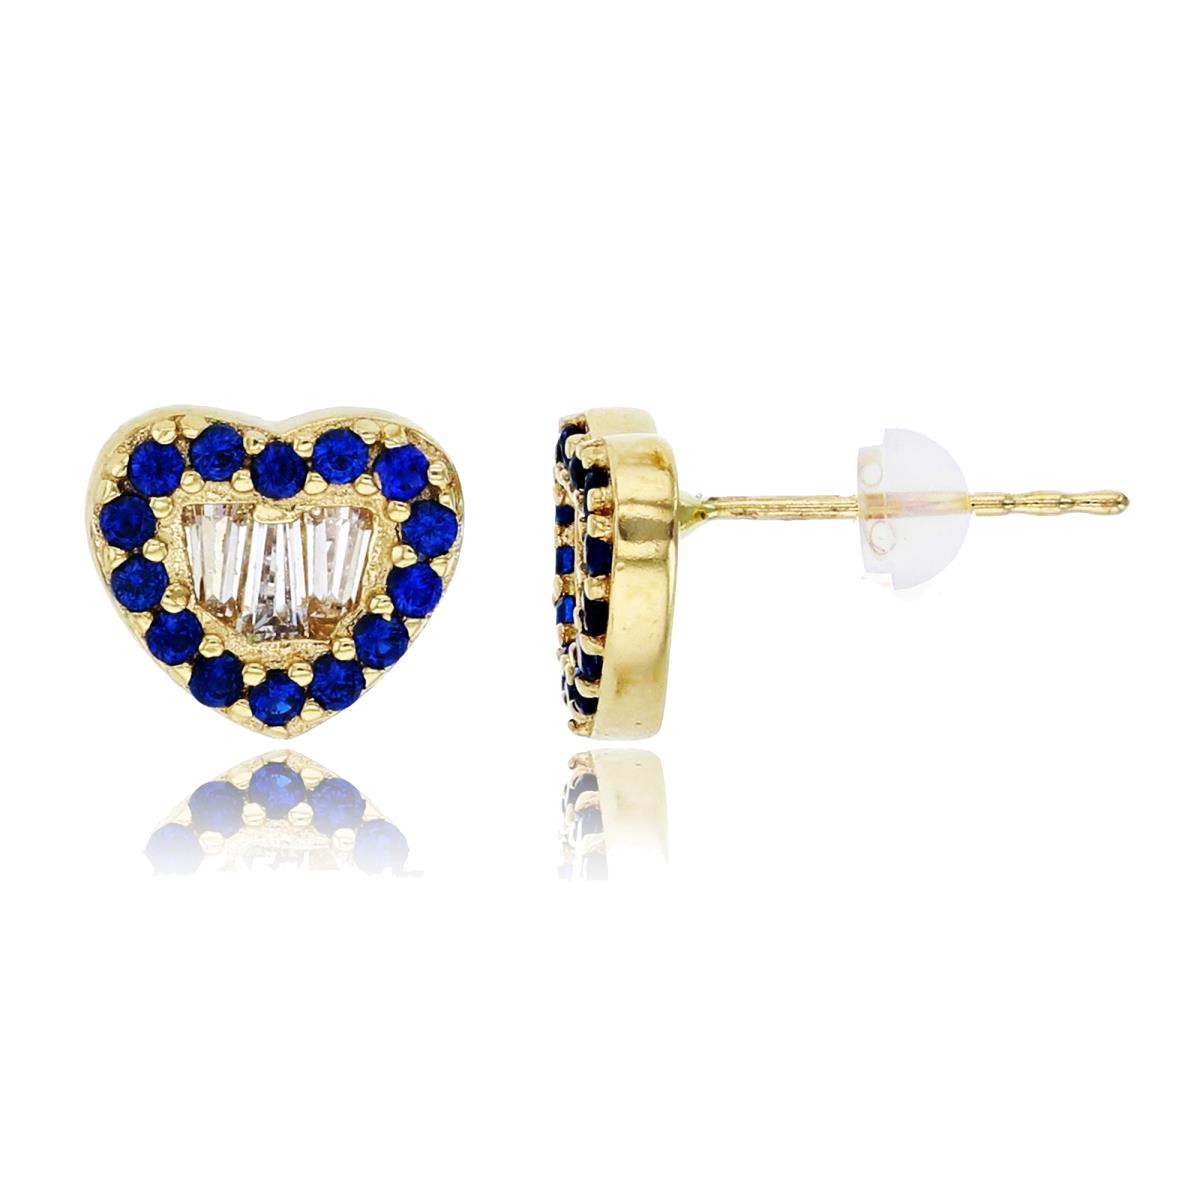 10K Yellow Gold 7x8mm Micropave Sapphire Rd Cut & White Baguette CZ Heart Stud Earring with Silicone Back